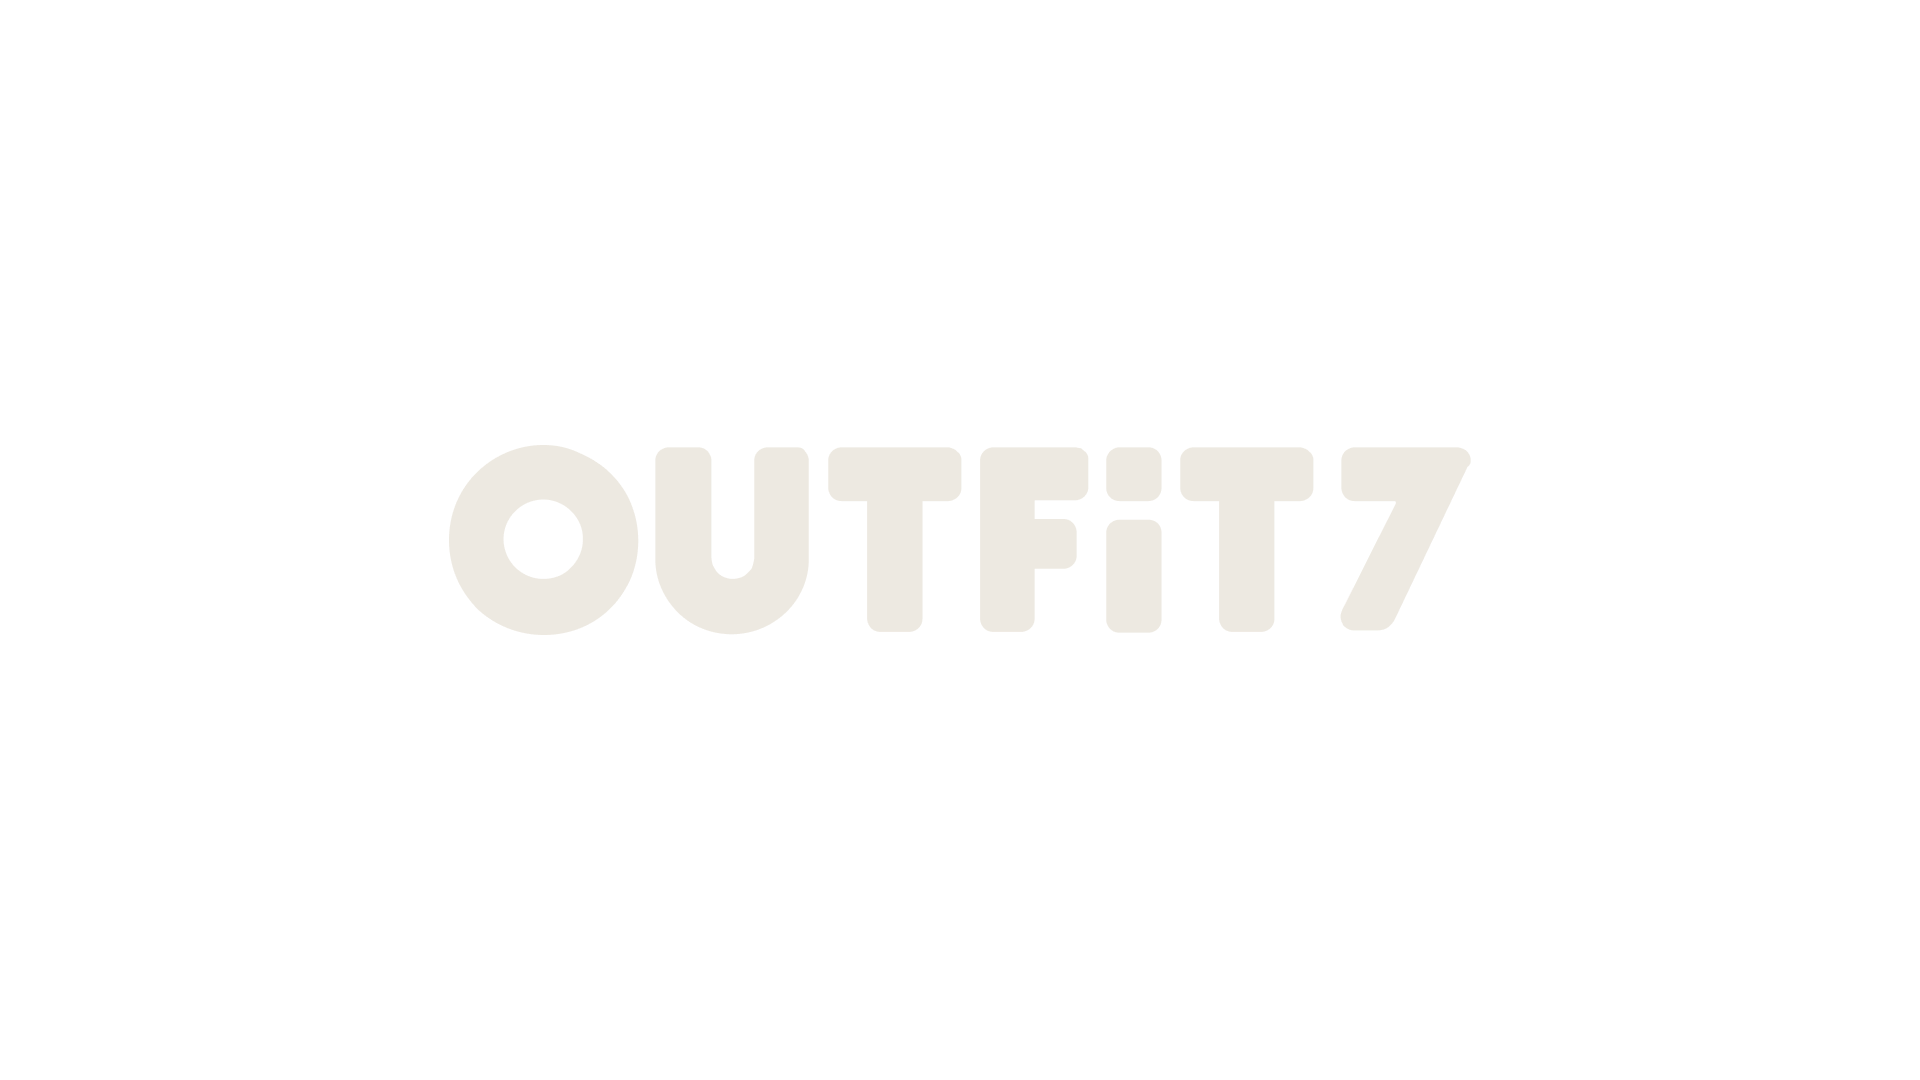 Outfit7 logo